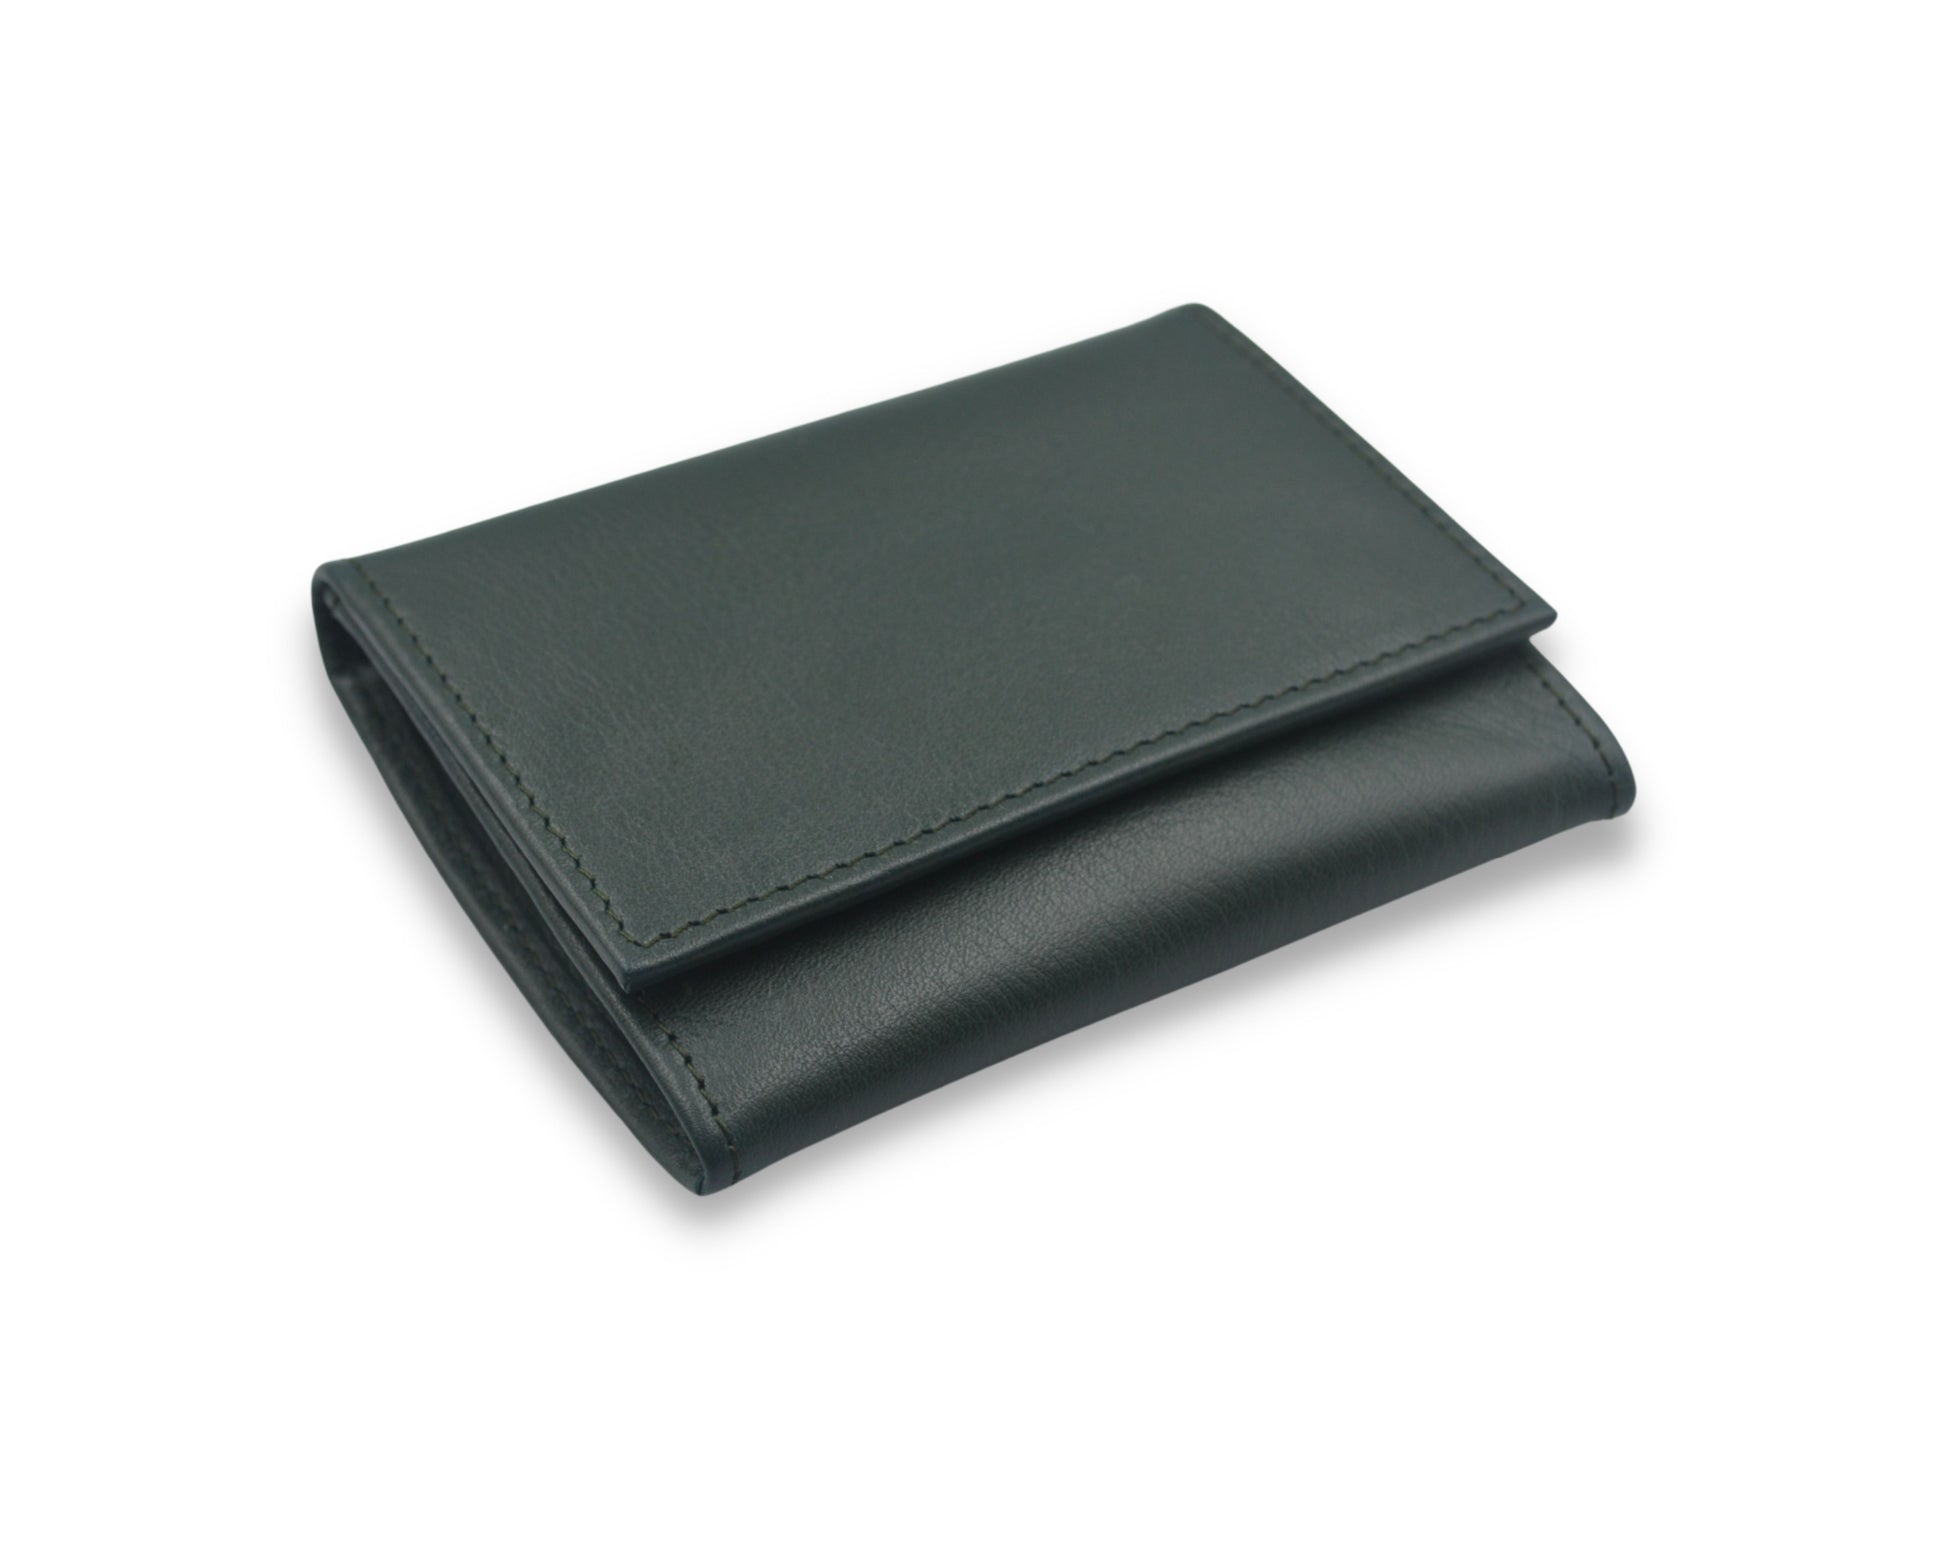 Discovery Wallet - Army Green